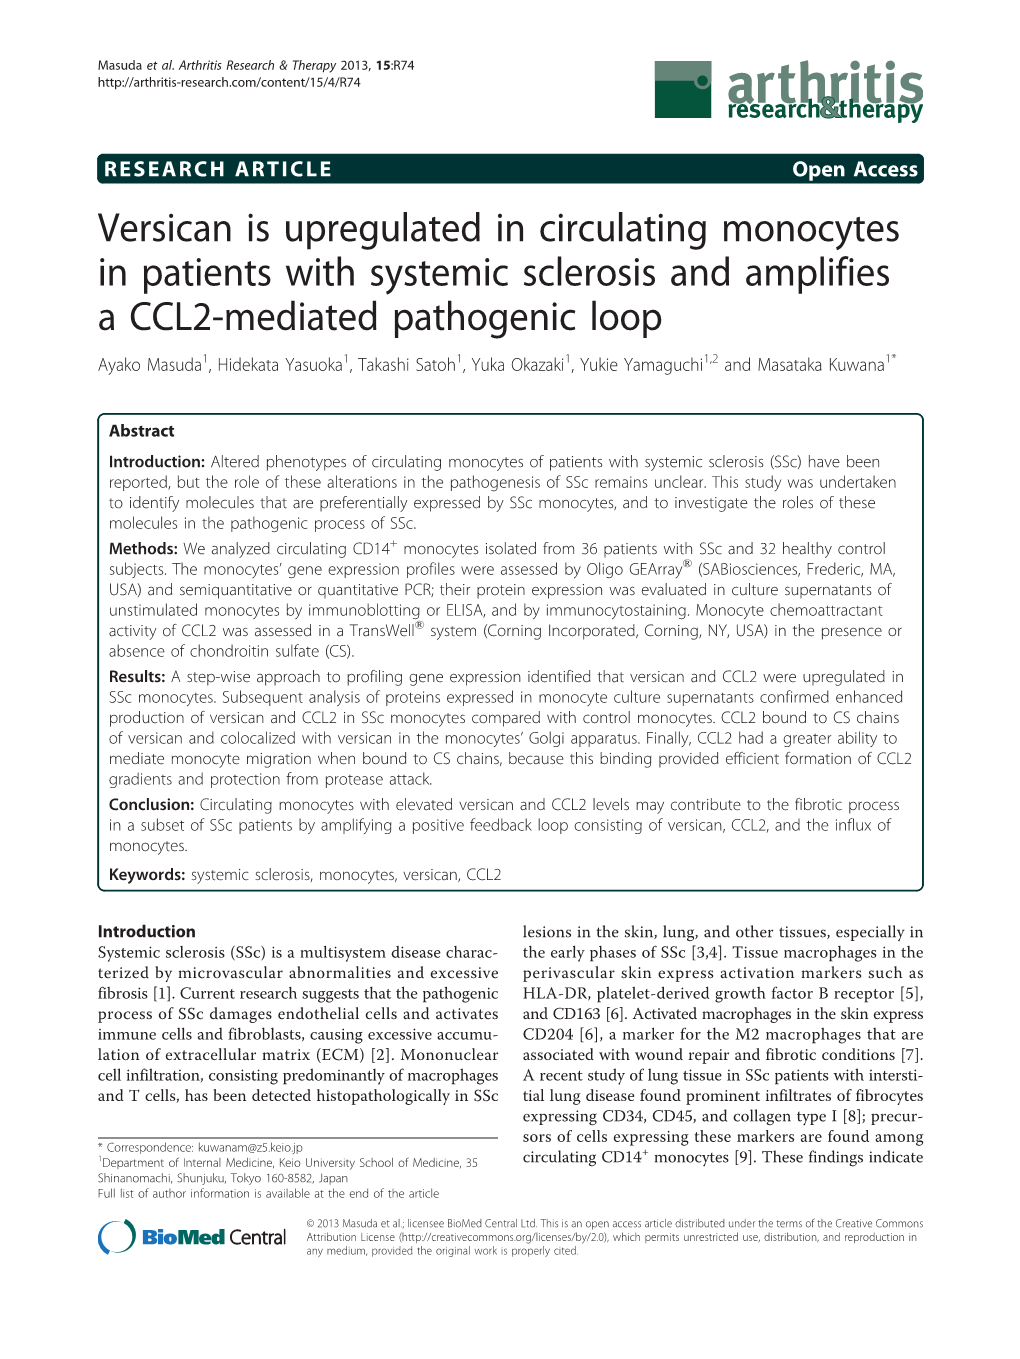 Versican Is Upregulated in Circulating Monocytes in Patients with Systemic